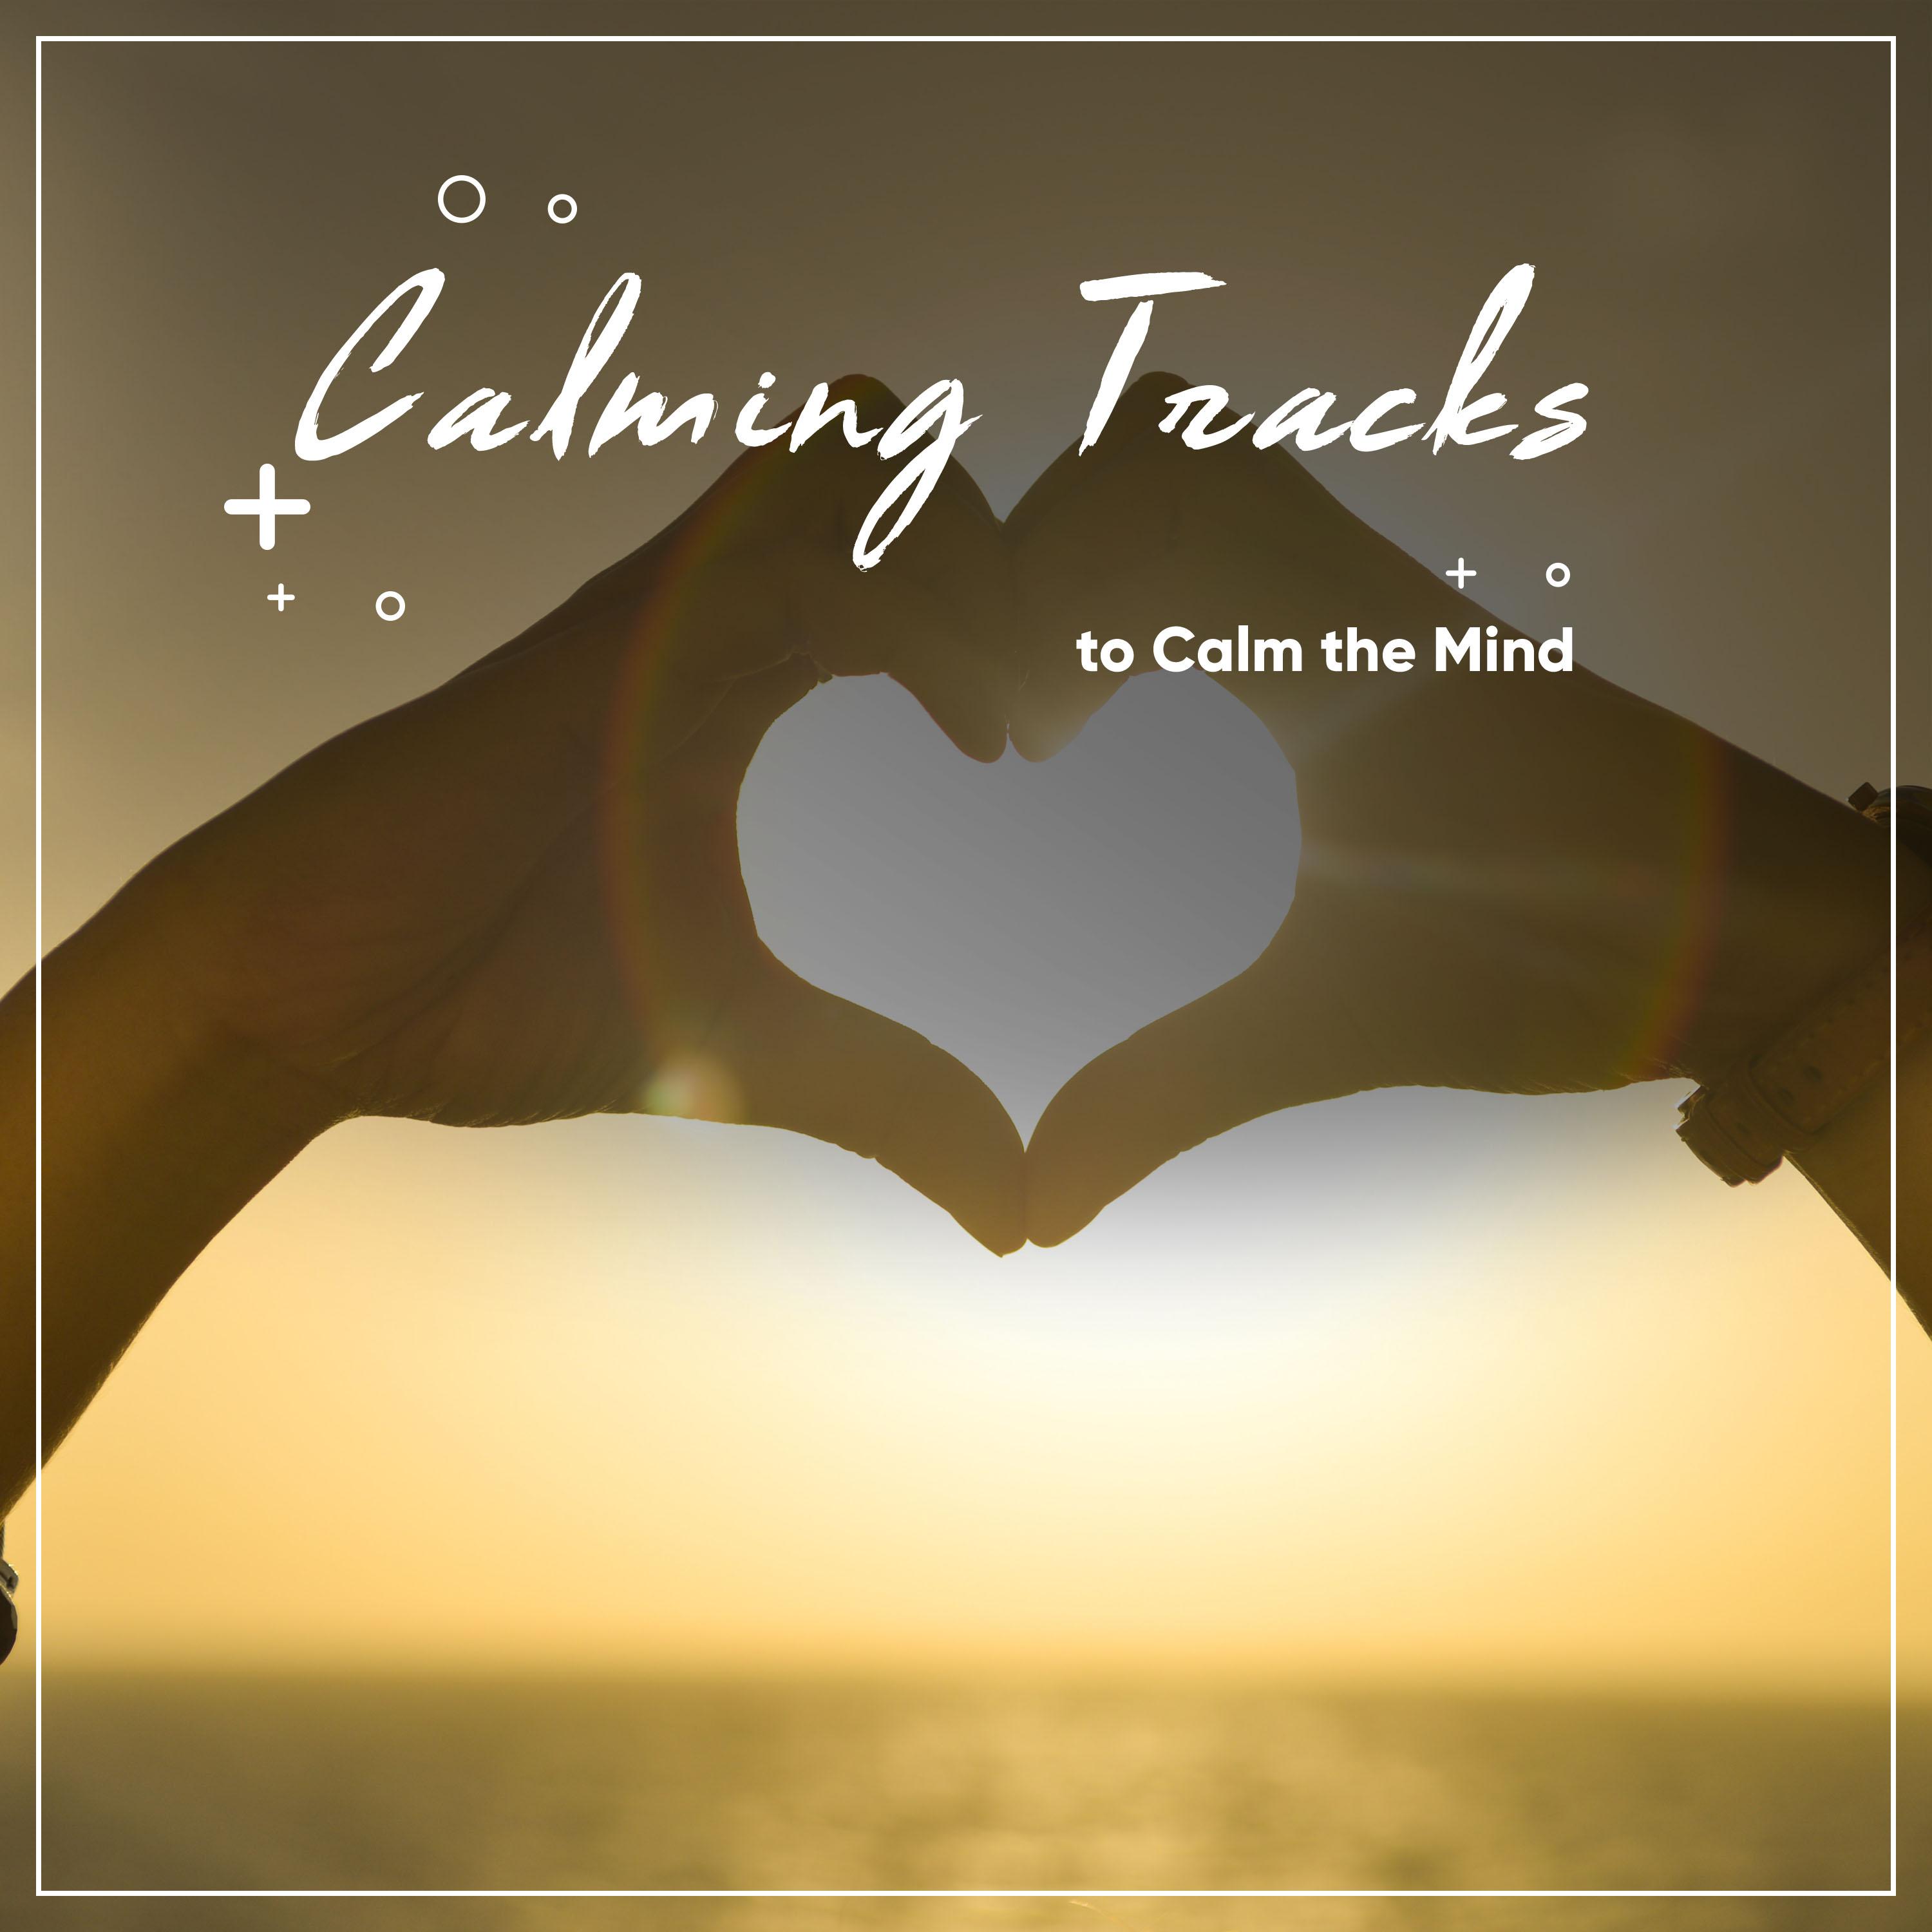 #19 Naturally Calming Tracks to Calm the Mind